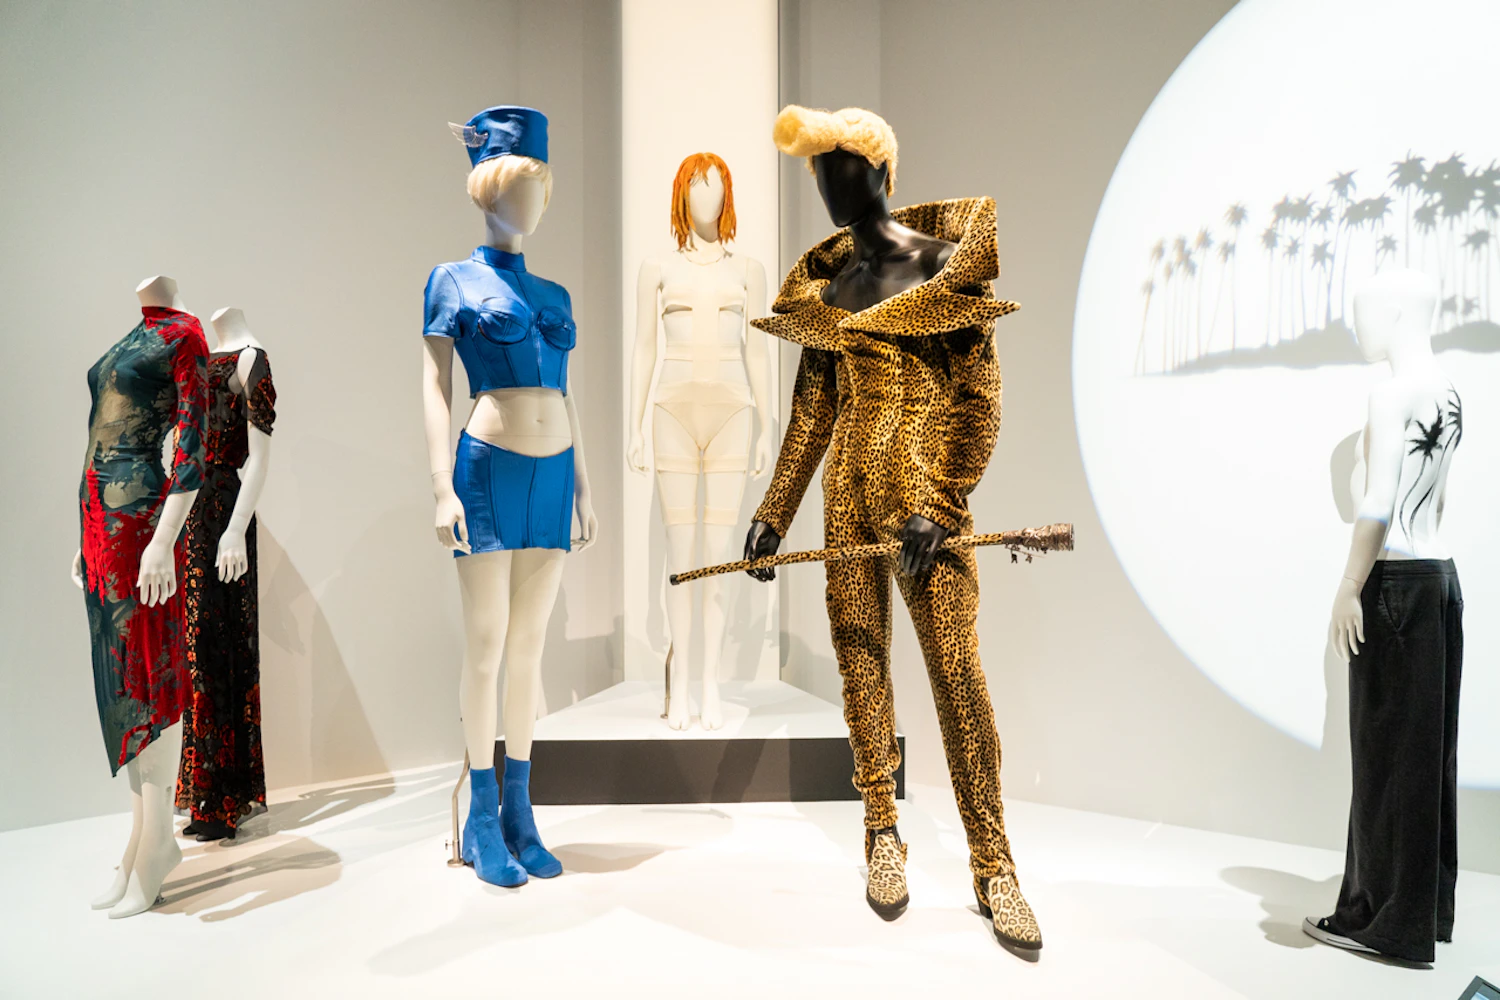 Jean Paul Gaultier's costumes for the movie "The Fifth Element" (middle three figures)